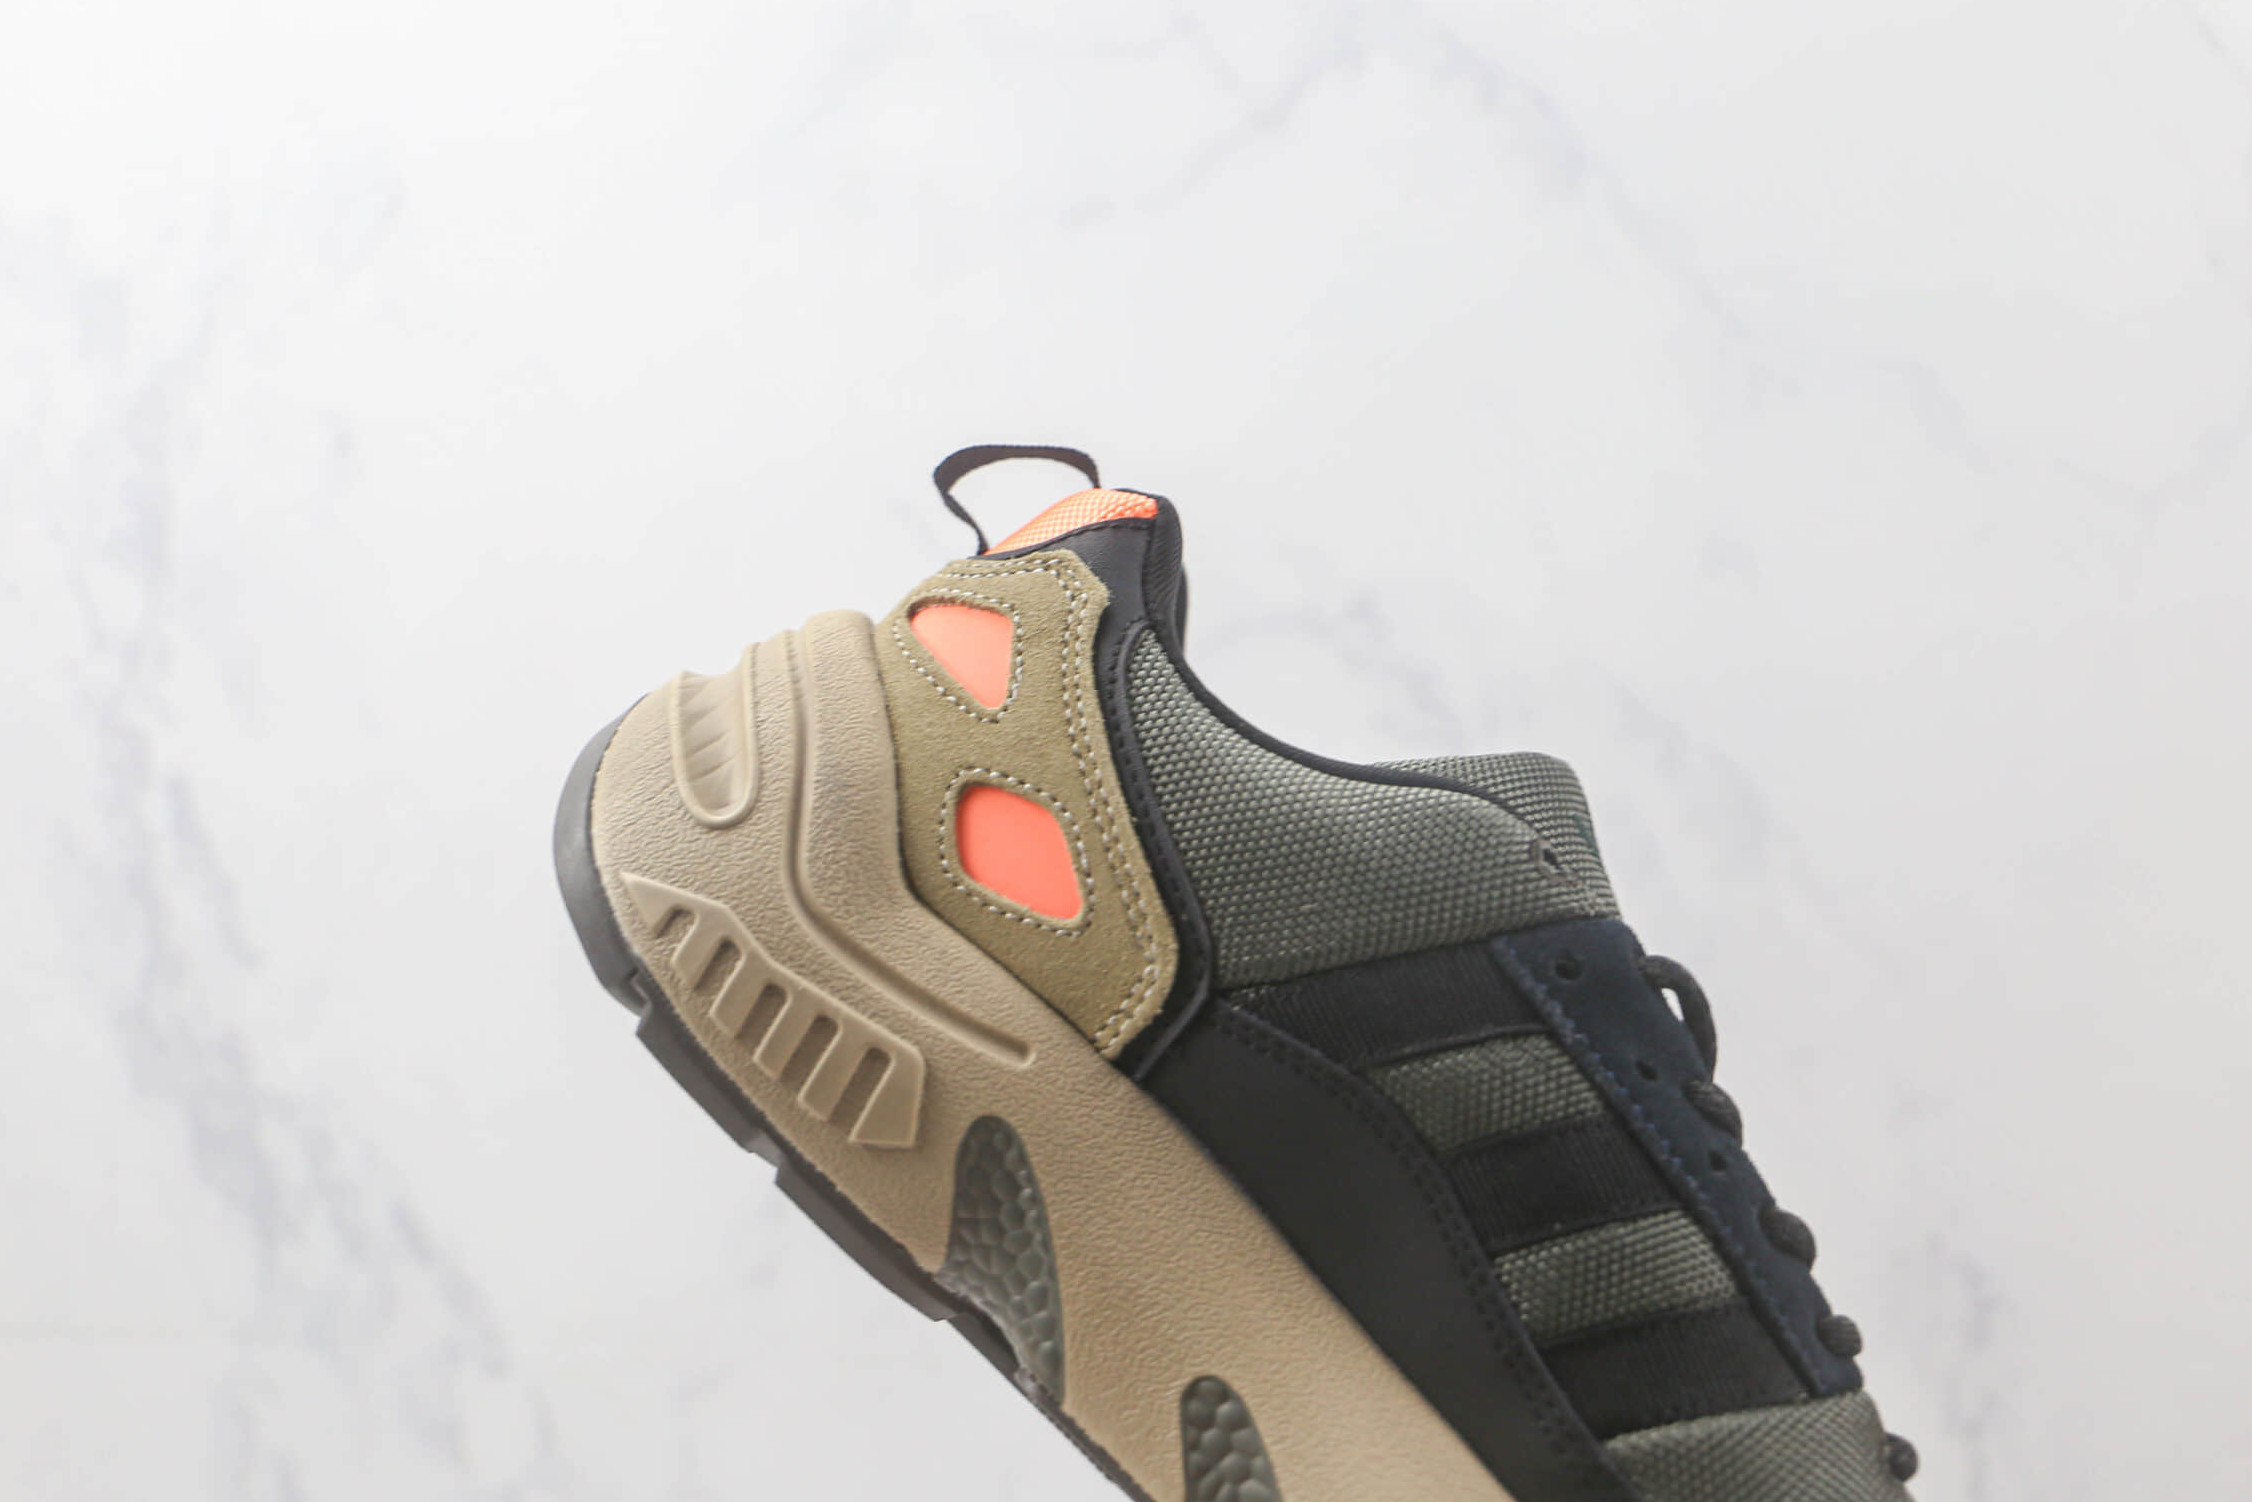 Adidas Originals ZX 22 Boost GX7006 – Exclusive Comfort and Style